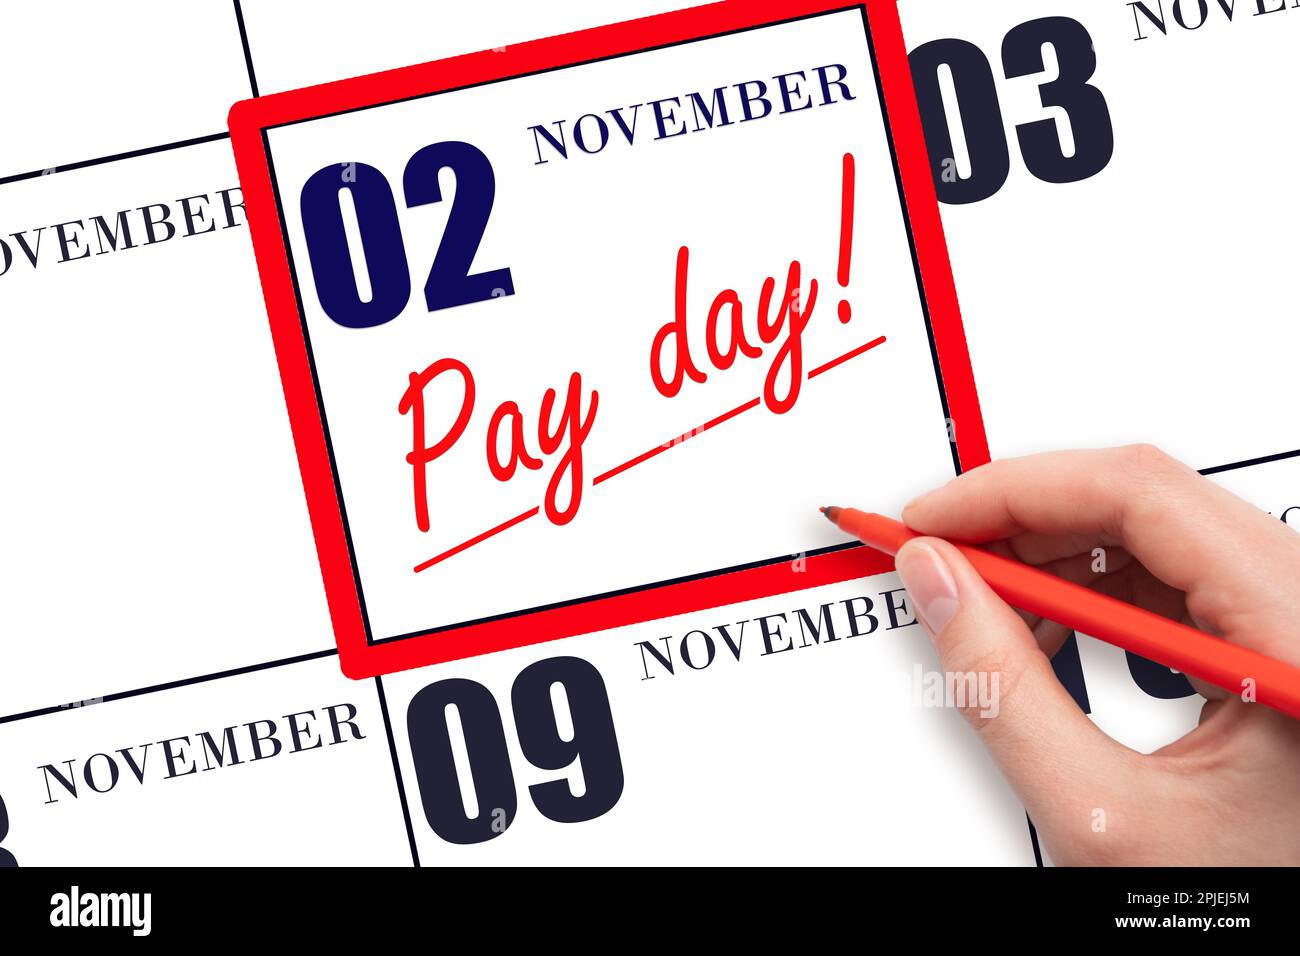 2nd day of November. Hand writing text PAY DATE on calendar date November 2 and underline it. Payment due date. Reminder concept of payment. Autumn mo Stock Photo